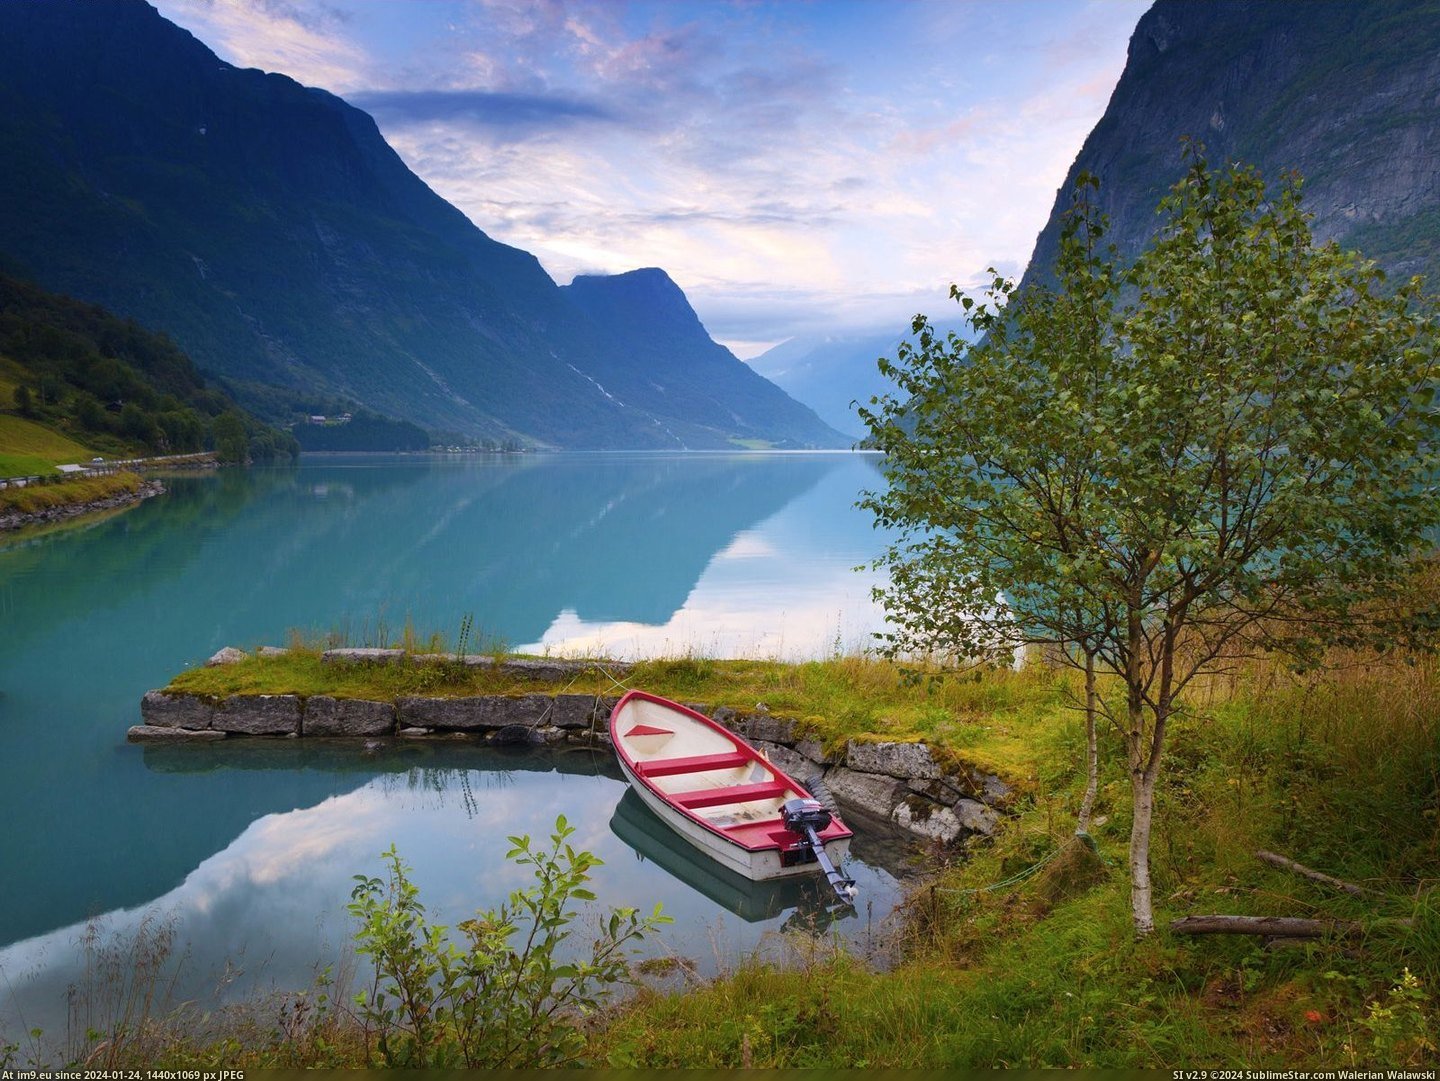 Western Fjords, Norway (in Beautiful photos and wallpapers)